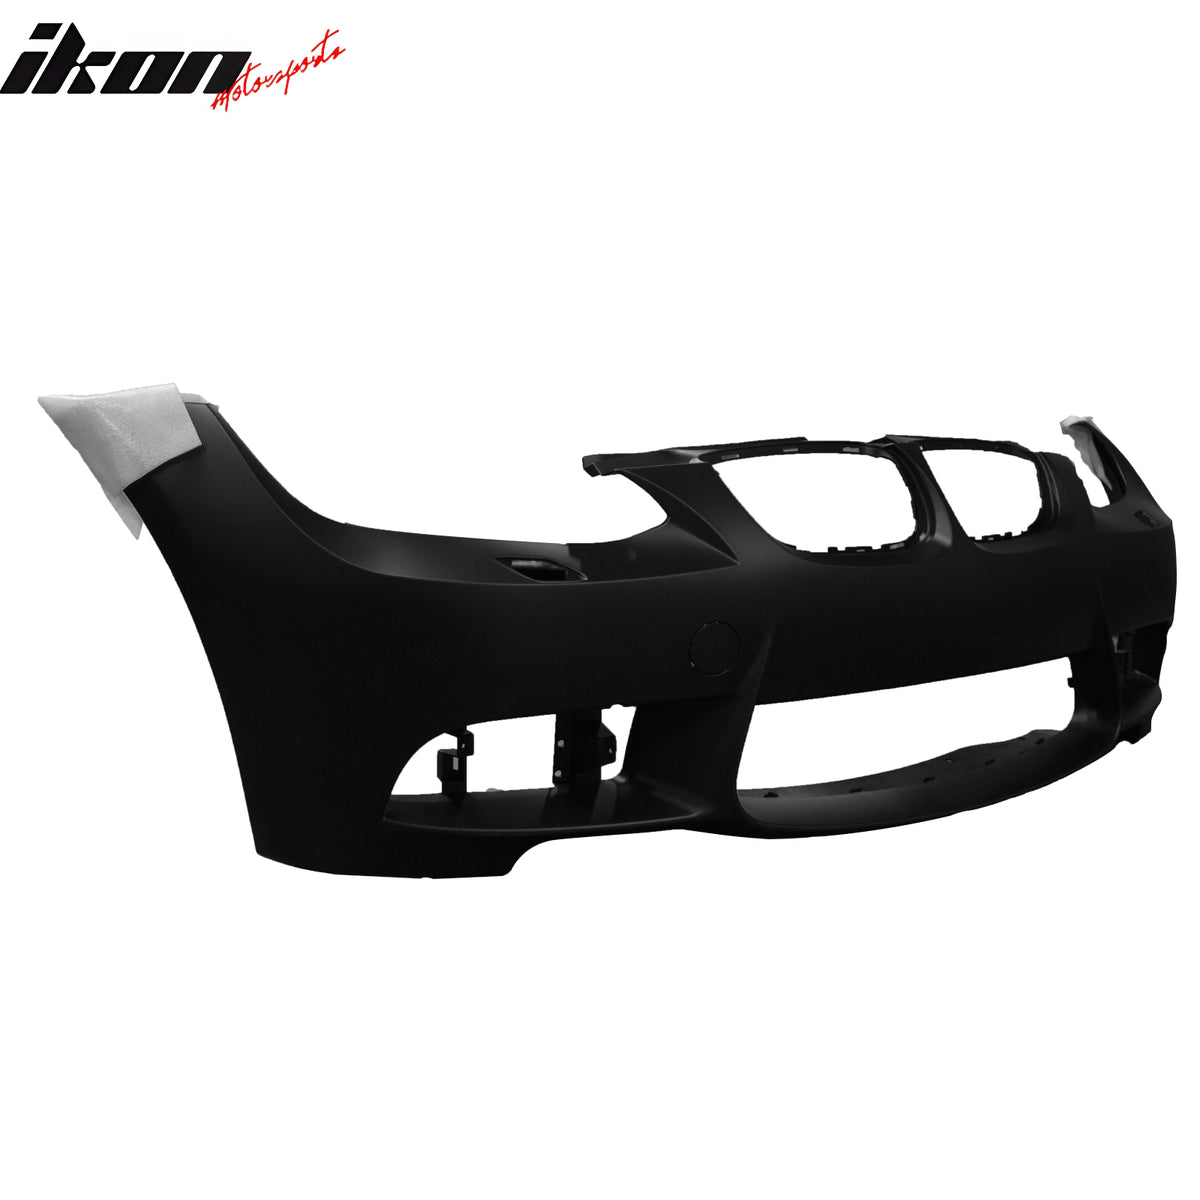 IKON MOTORSPORTS, Front Bumper Cover Compatible With 2007-2010 BMW E92 3 Series 2-Door Coupe, Unpainted PP M3 Style Bumper Conversion Guard Protector Bodykit